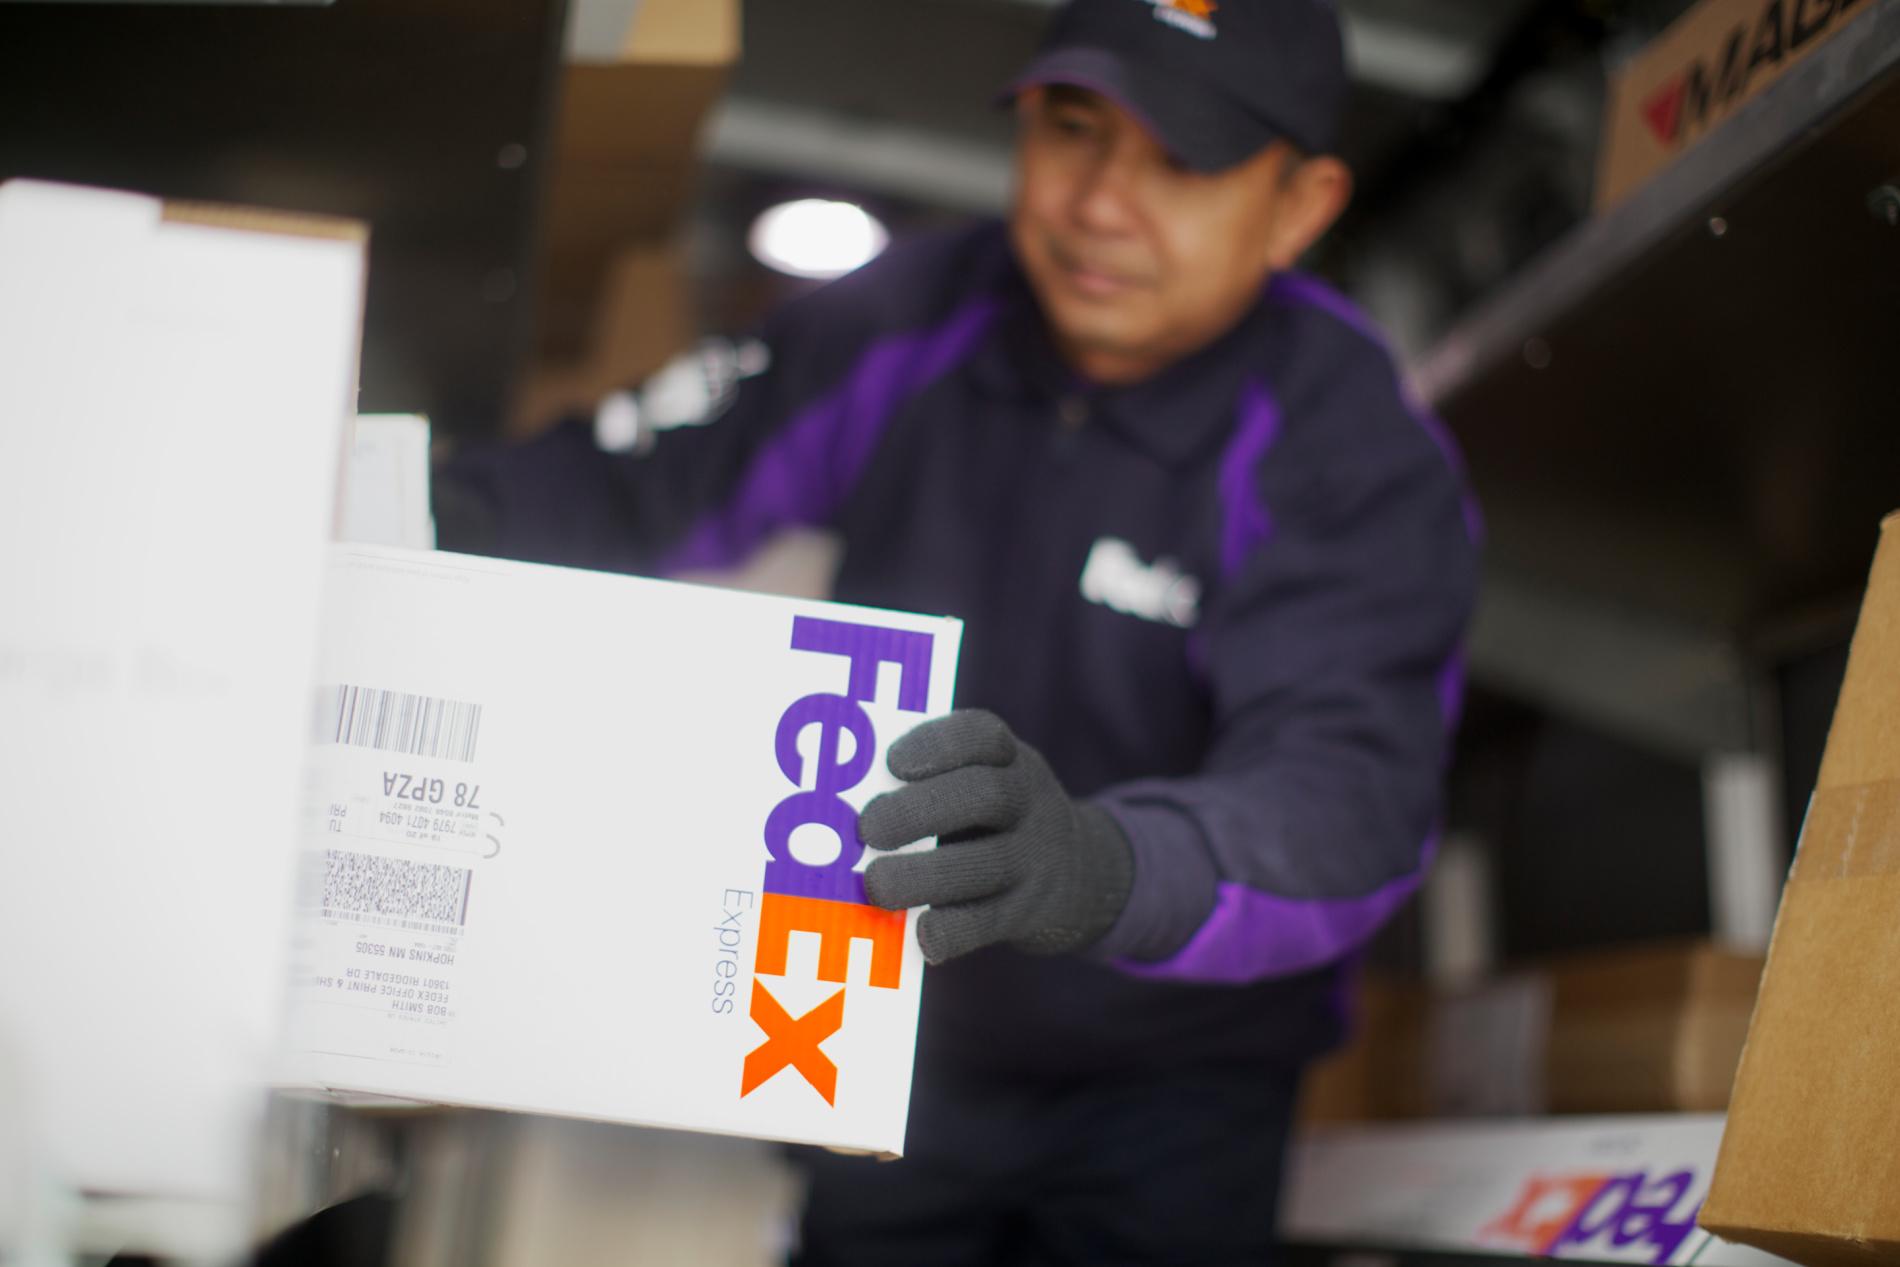 FedEx One Rate vs FedEx Standard Rate: Which is Best?